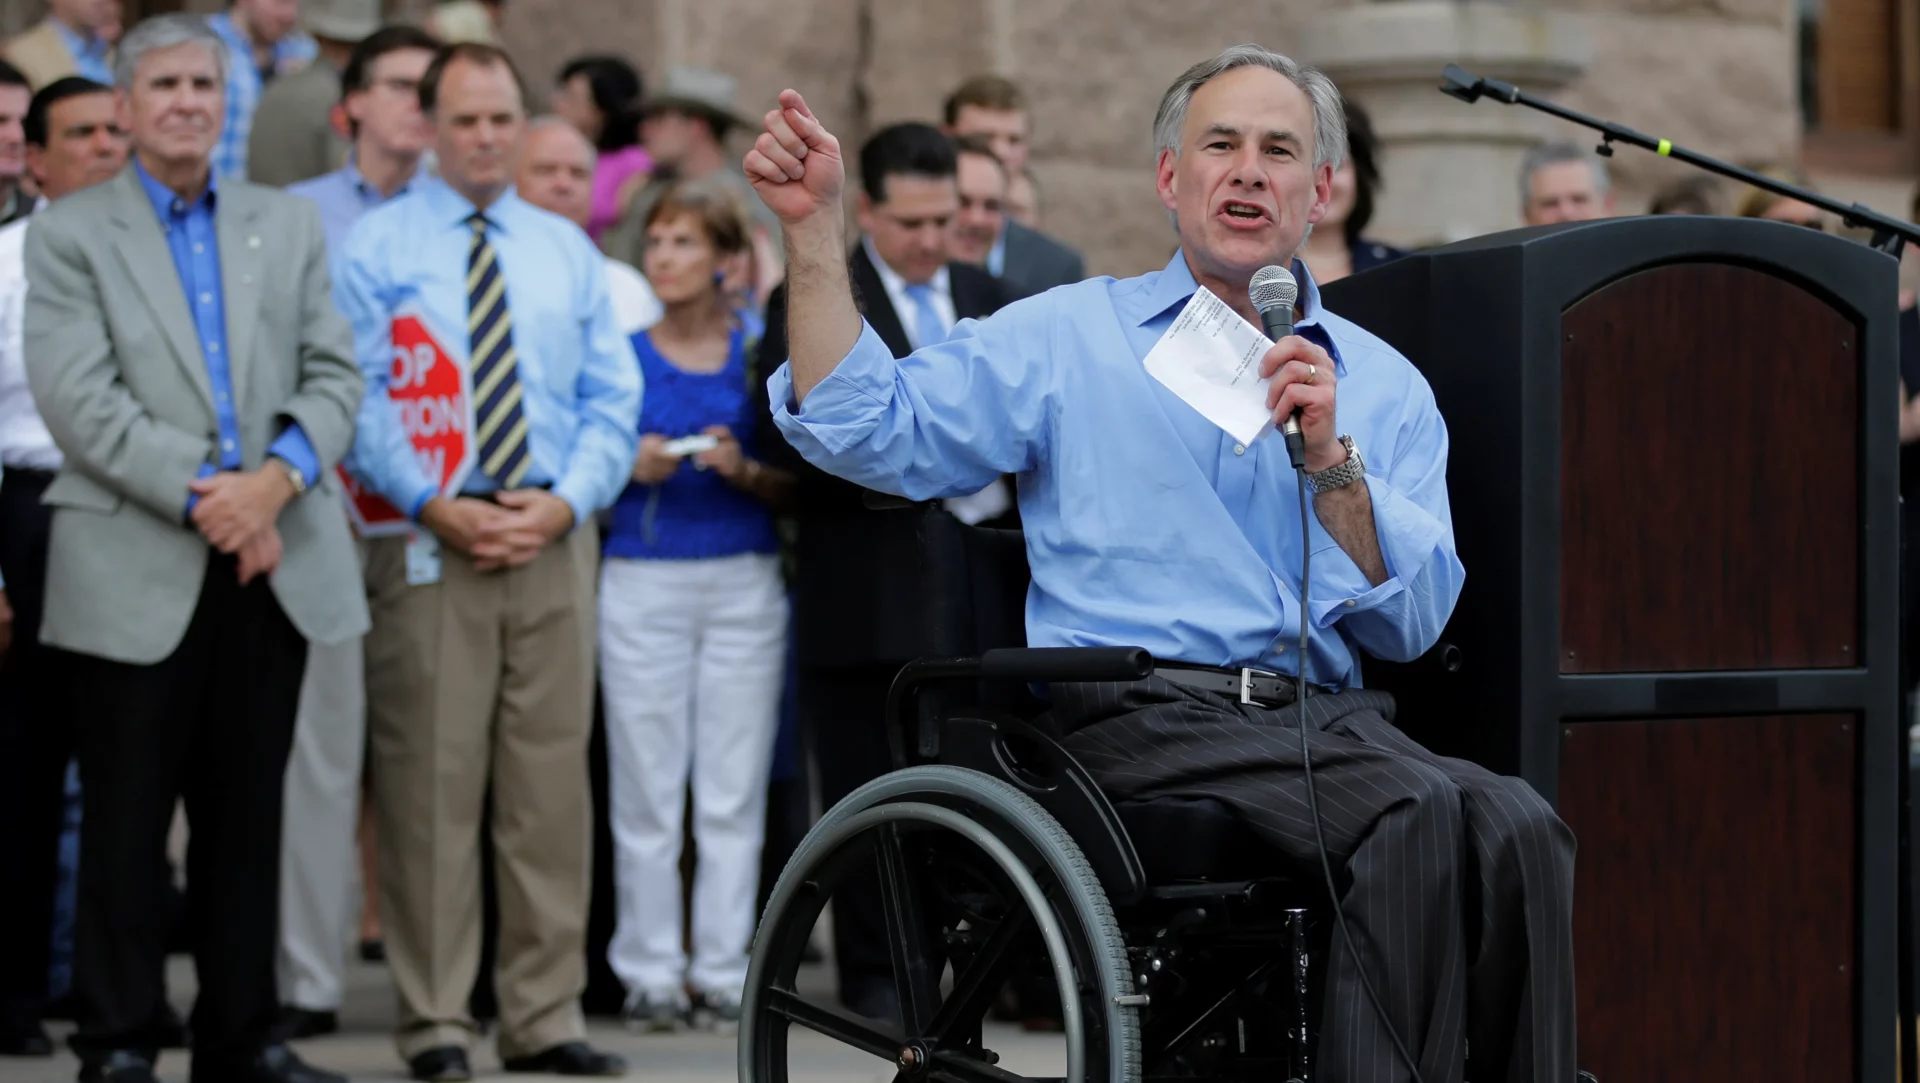 What Happened To Greg Abbott? Accident Crash Video CCTV Footage Viral, Health Condition News!